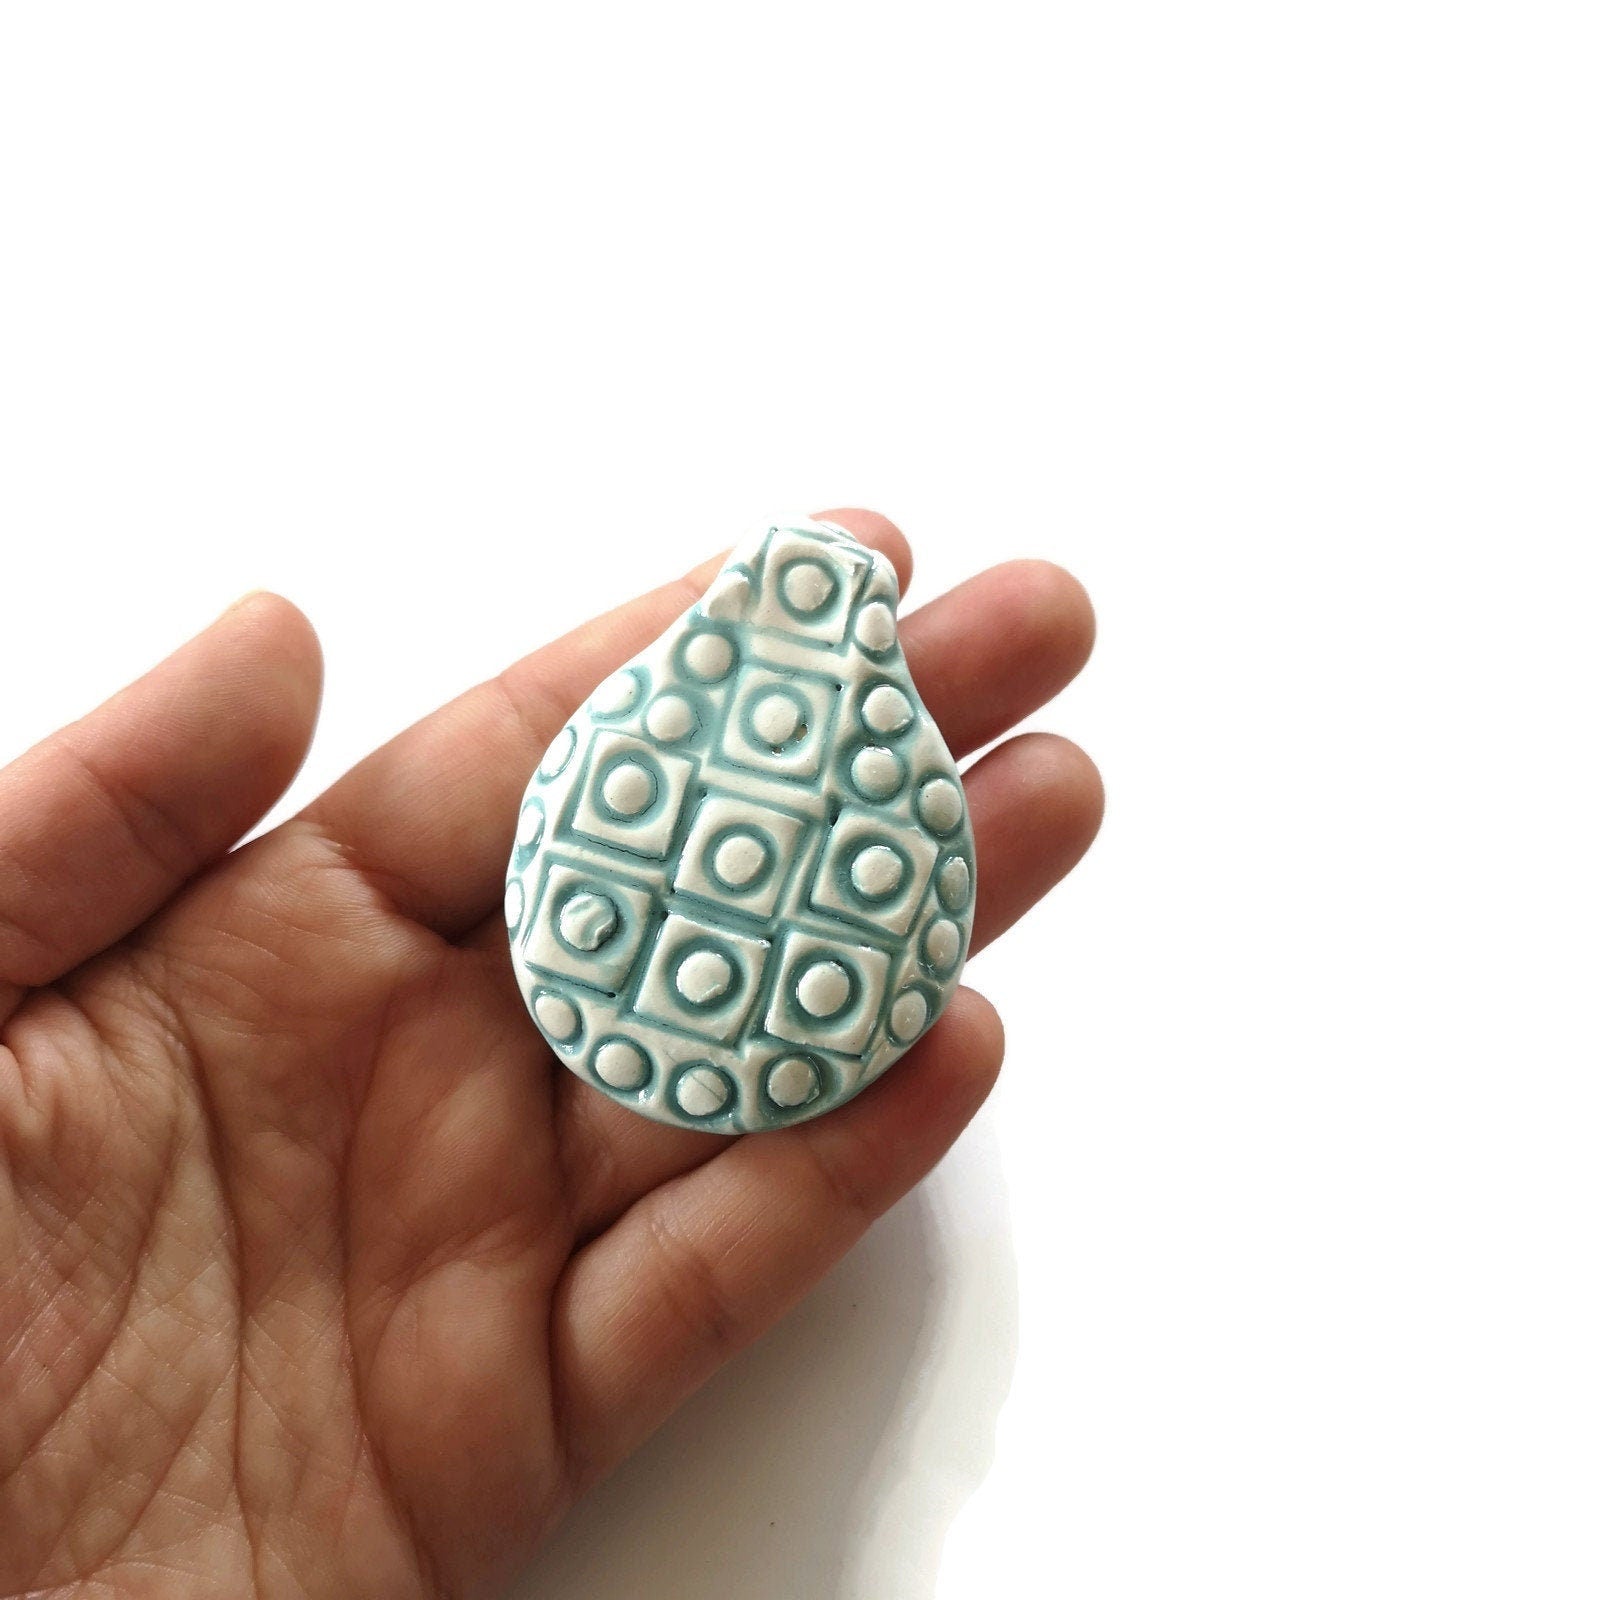 Unique Jewelry Clay Charms For Jewelry Making, Handmade Ceramics Extra Large Pendant Necklace Gift For Mom, Best Sellers Turquoise Pendant - Ceramica Ana Rafael